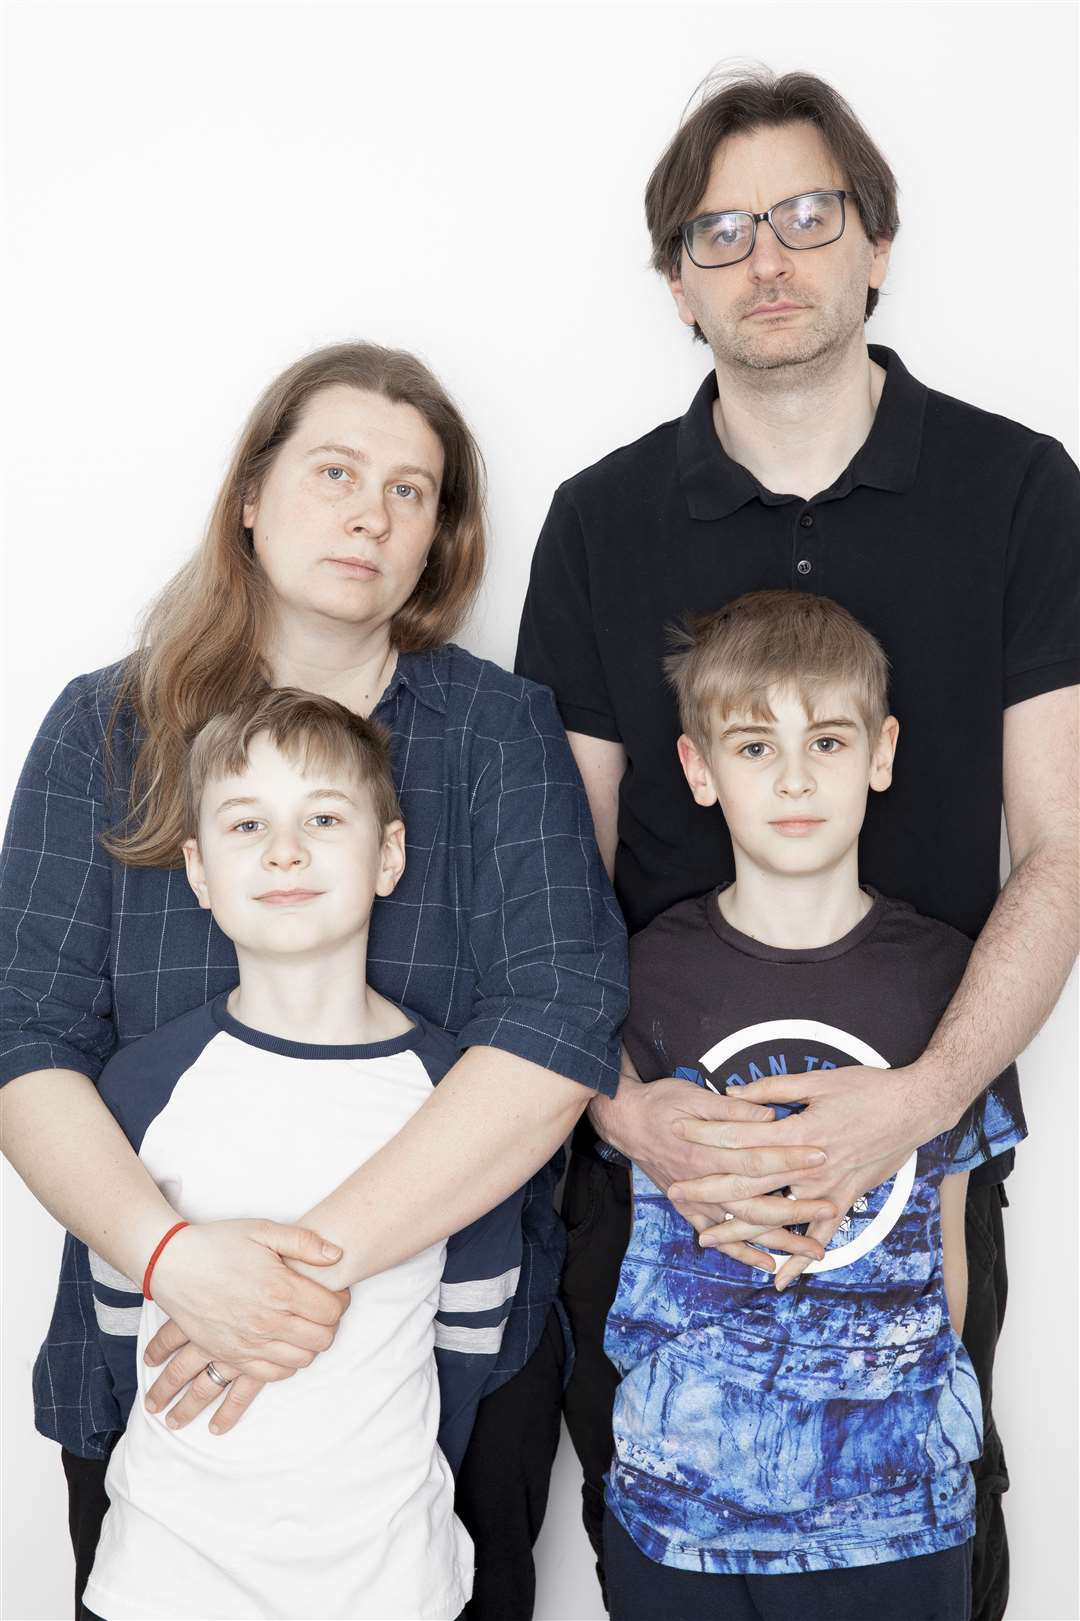 Ukrainian mum-of-two Marina Hughes with her husband Phil and their children Thomas,10, and Timothy, 8, at their home in Sittingbourne. She is worried for her mother and grandmother, who has demenita, are still trapped in Kyiv as Putin's Russian army moves in